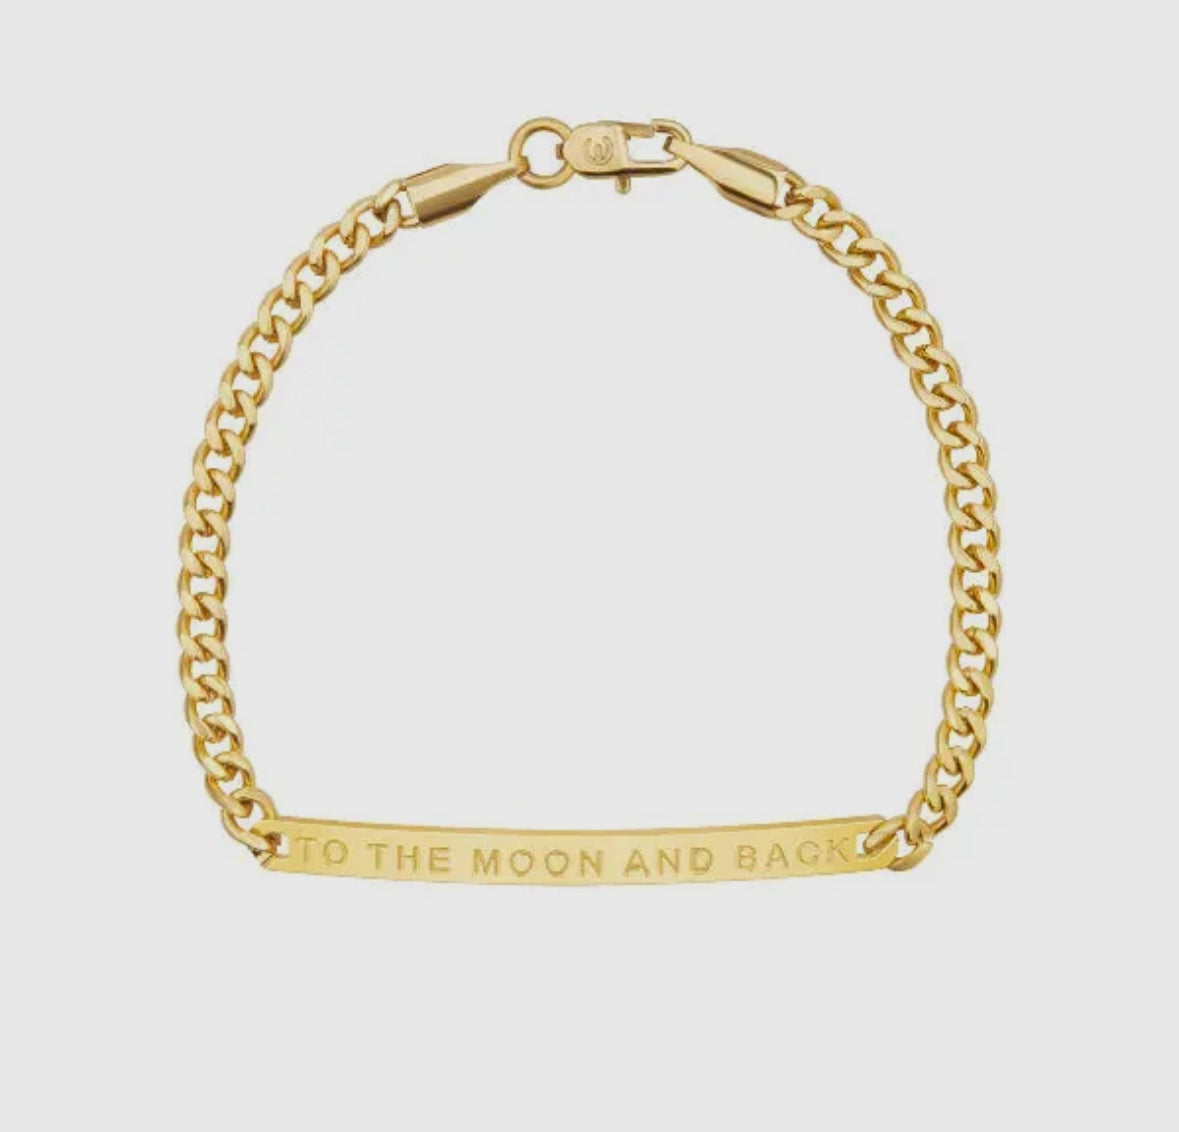 To the moon and back bracelet